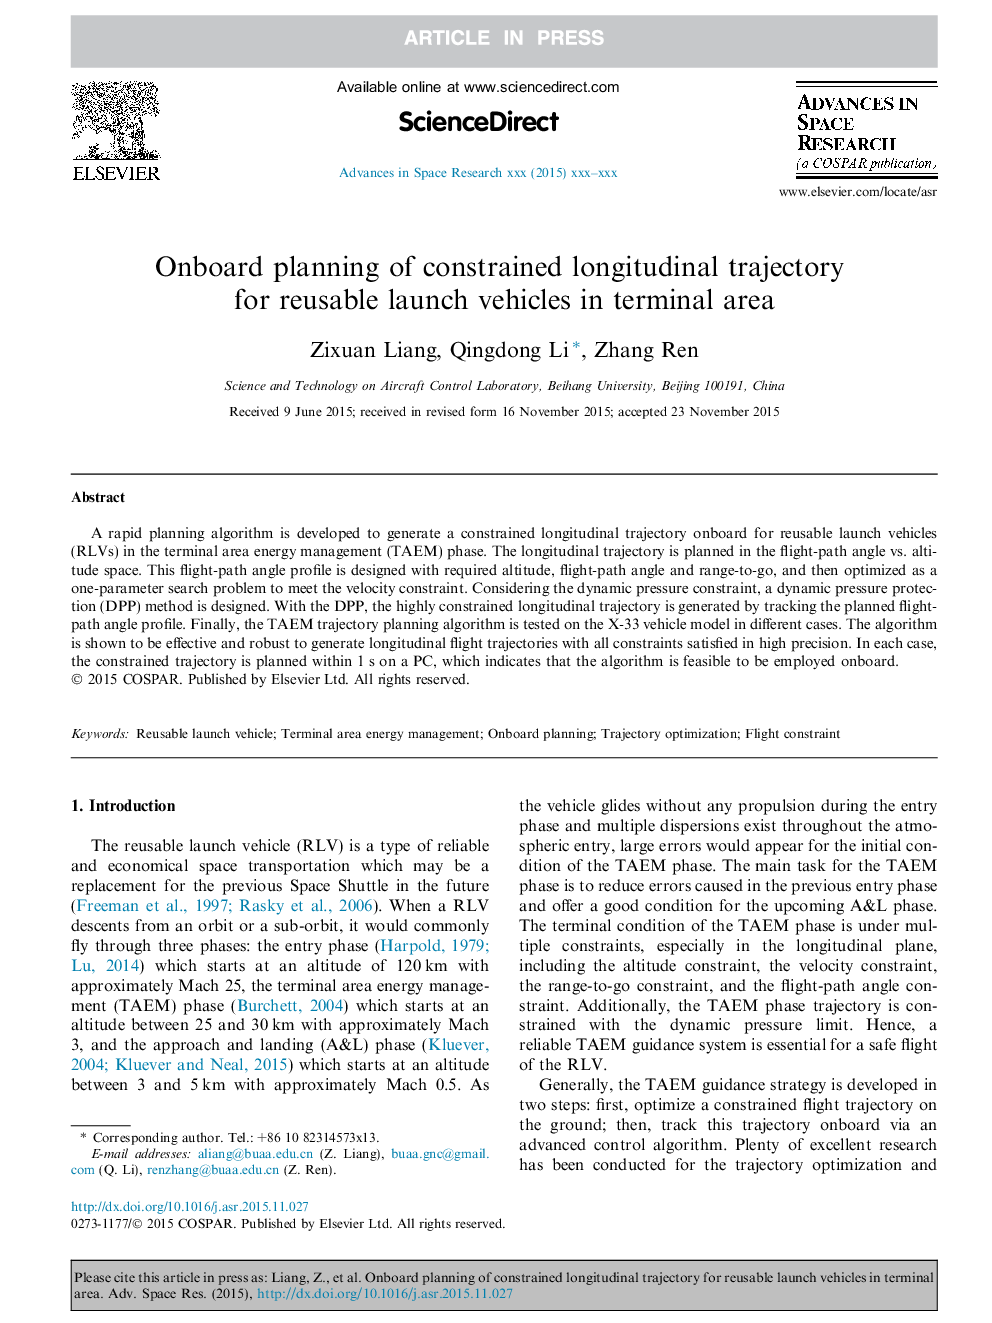 Onboard planning of constrained longitudinal trajectory for reusable launch vehicles in terminal area